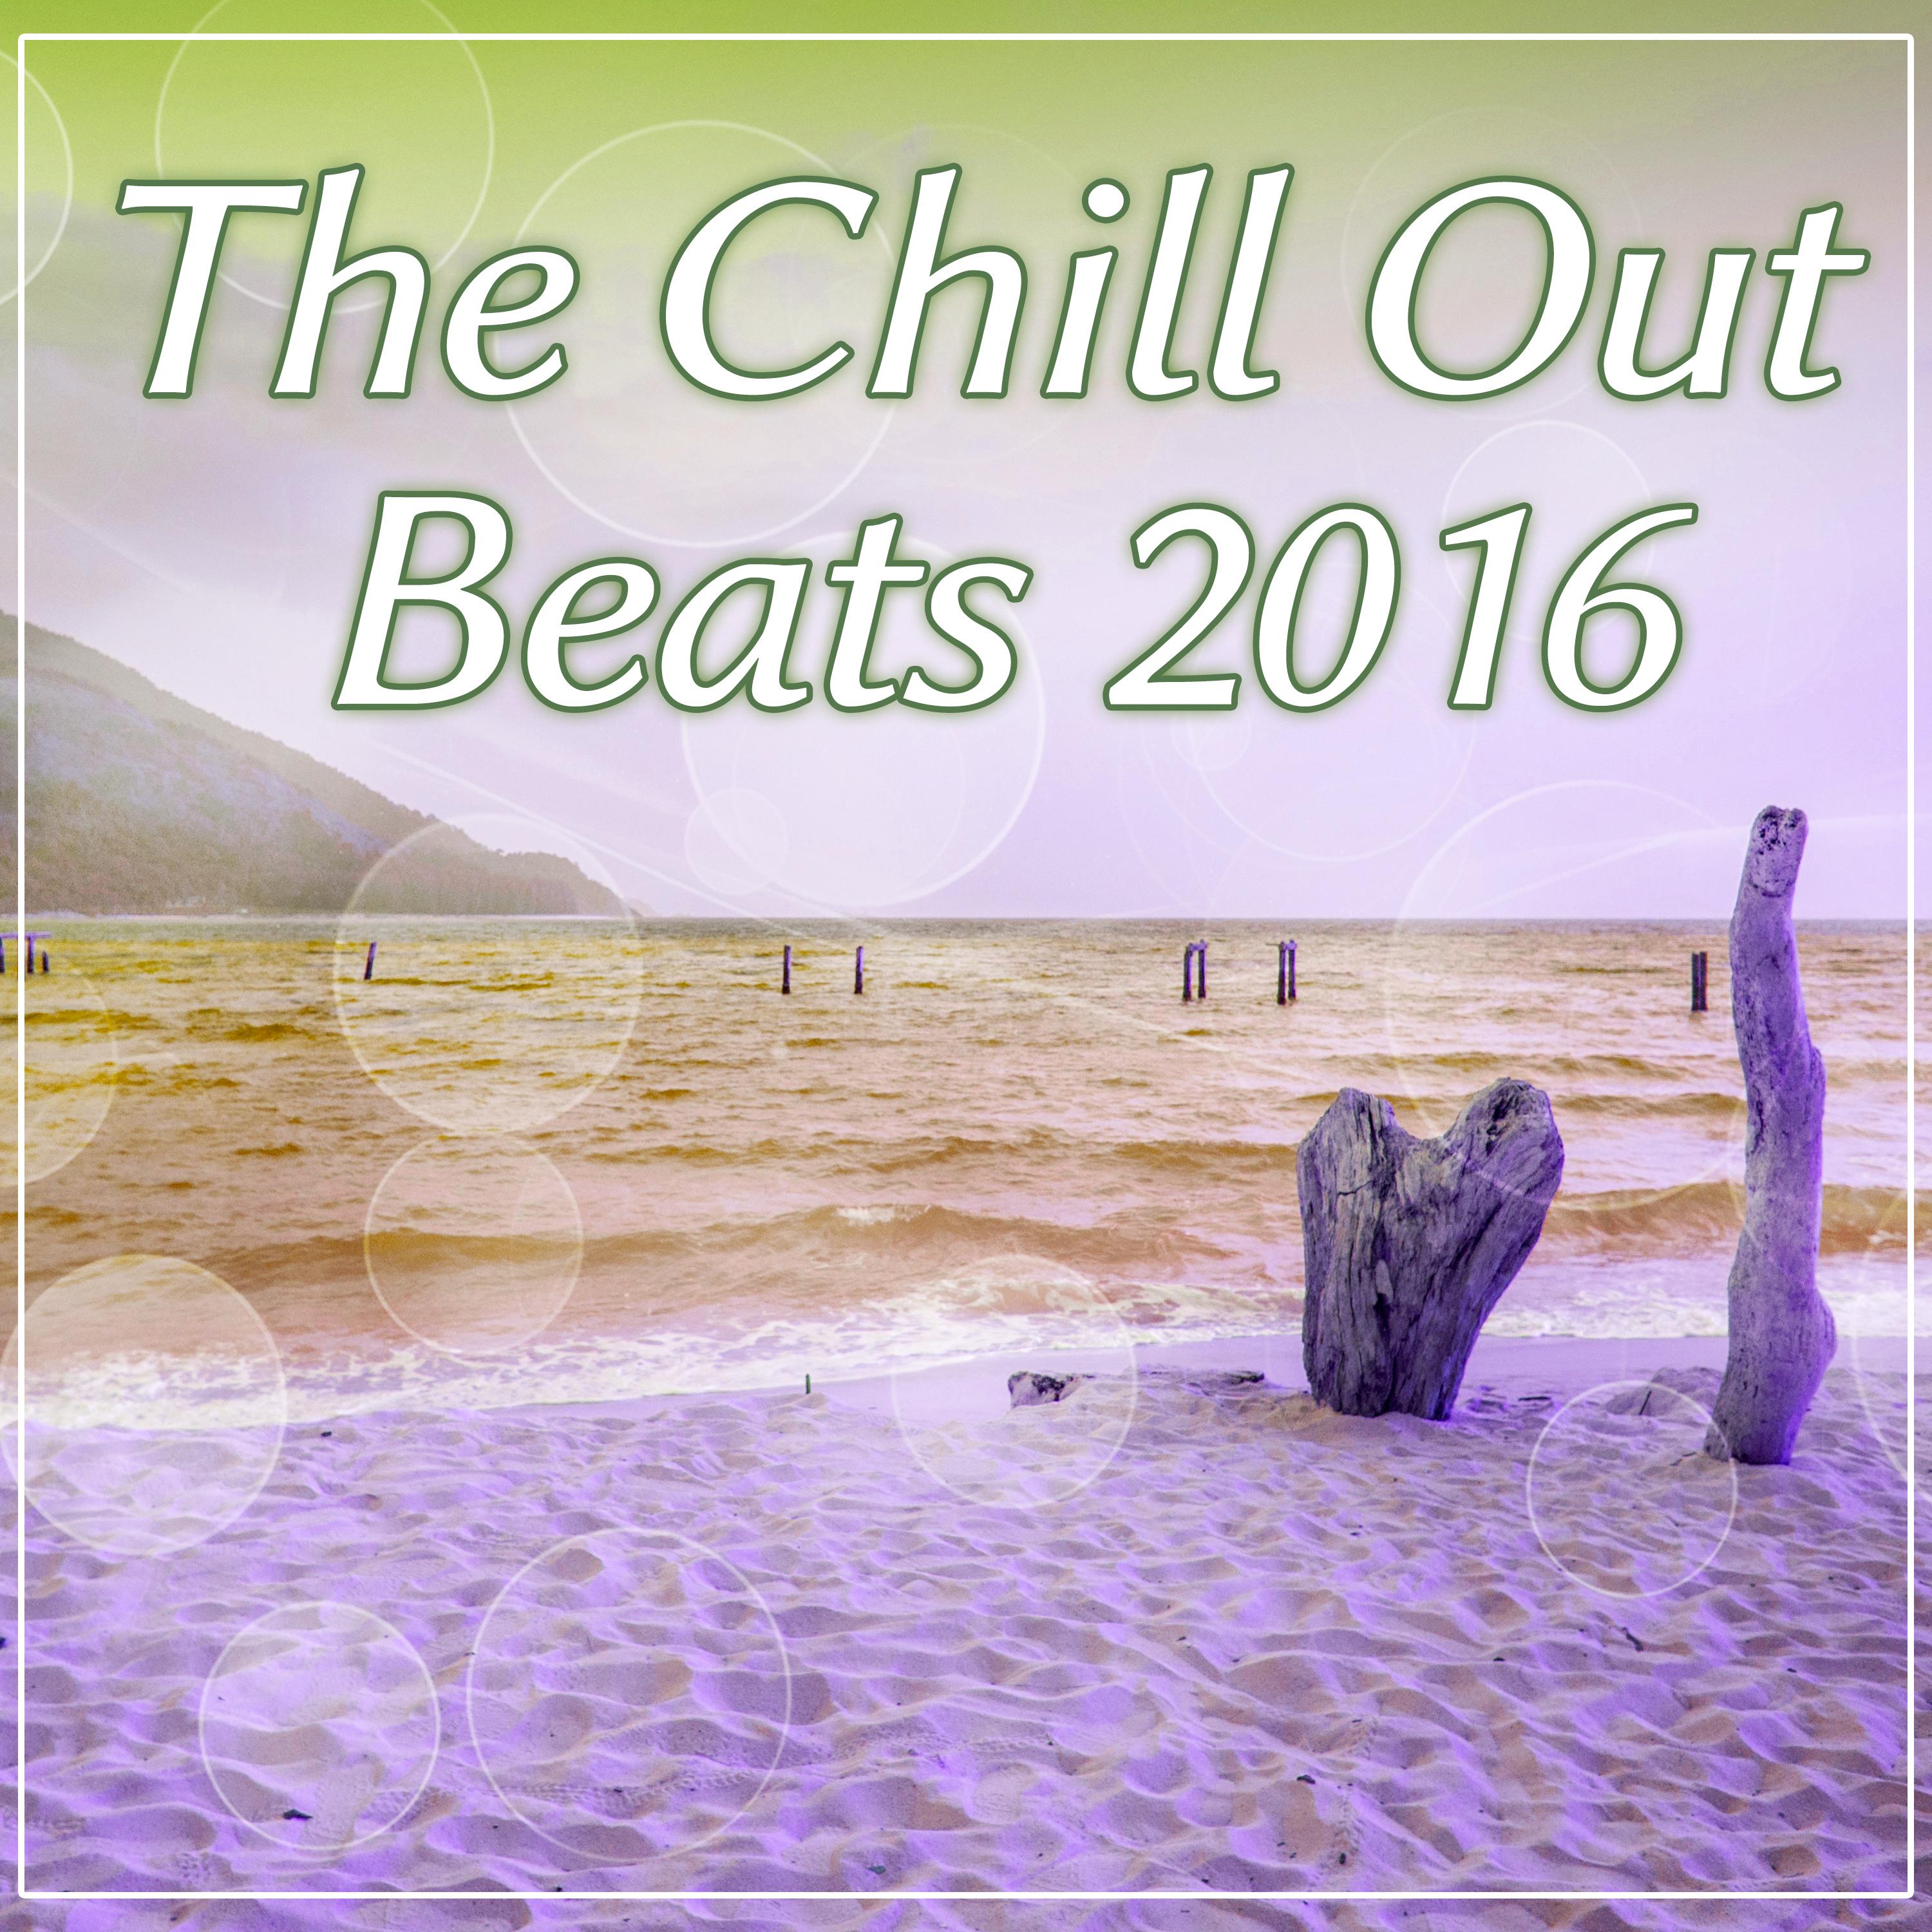 The Chill Out Beats 2016  The Greatest Chillout Beats of the Year, Summer Music, Beach Party,  Greatest Beats of Summer Chill Out